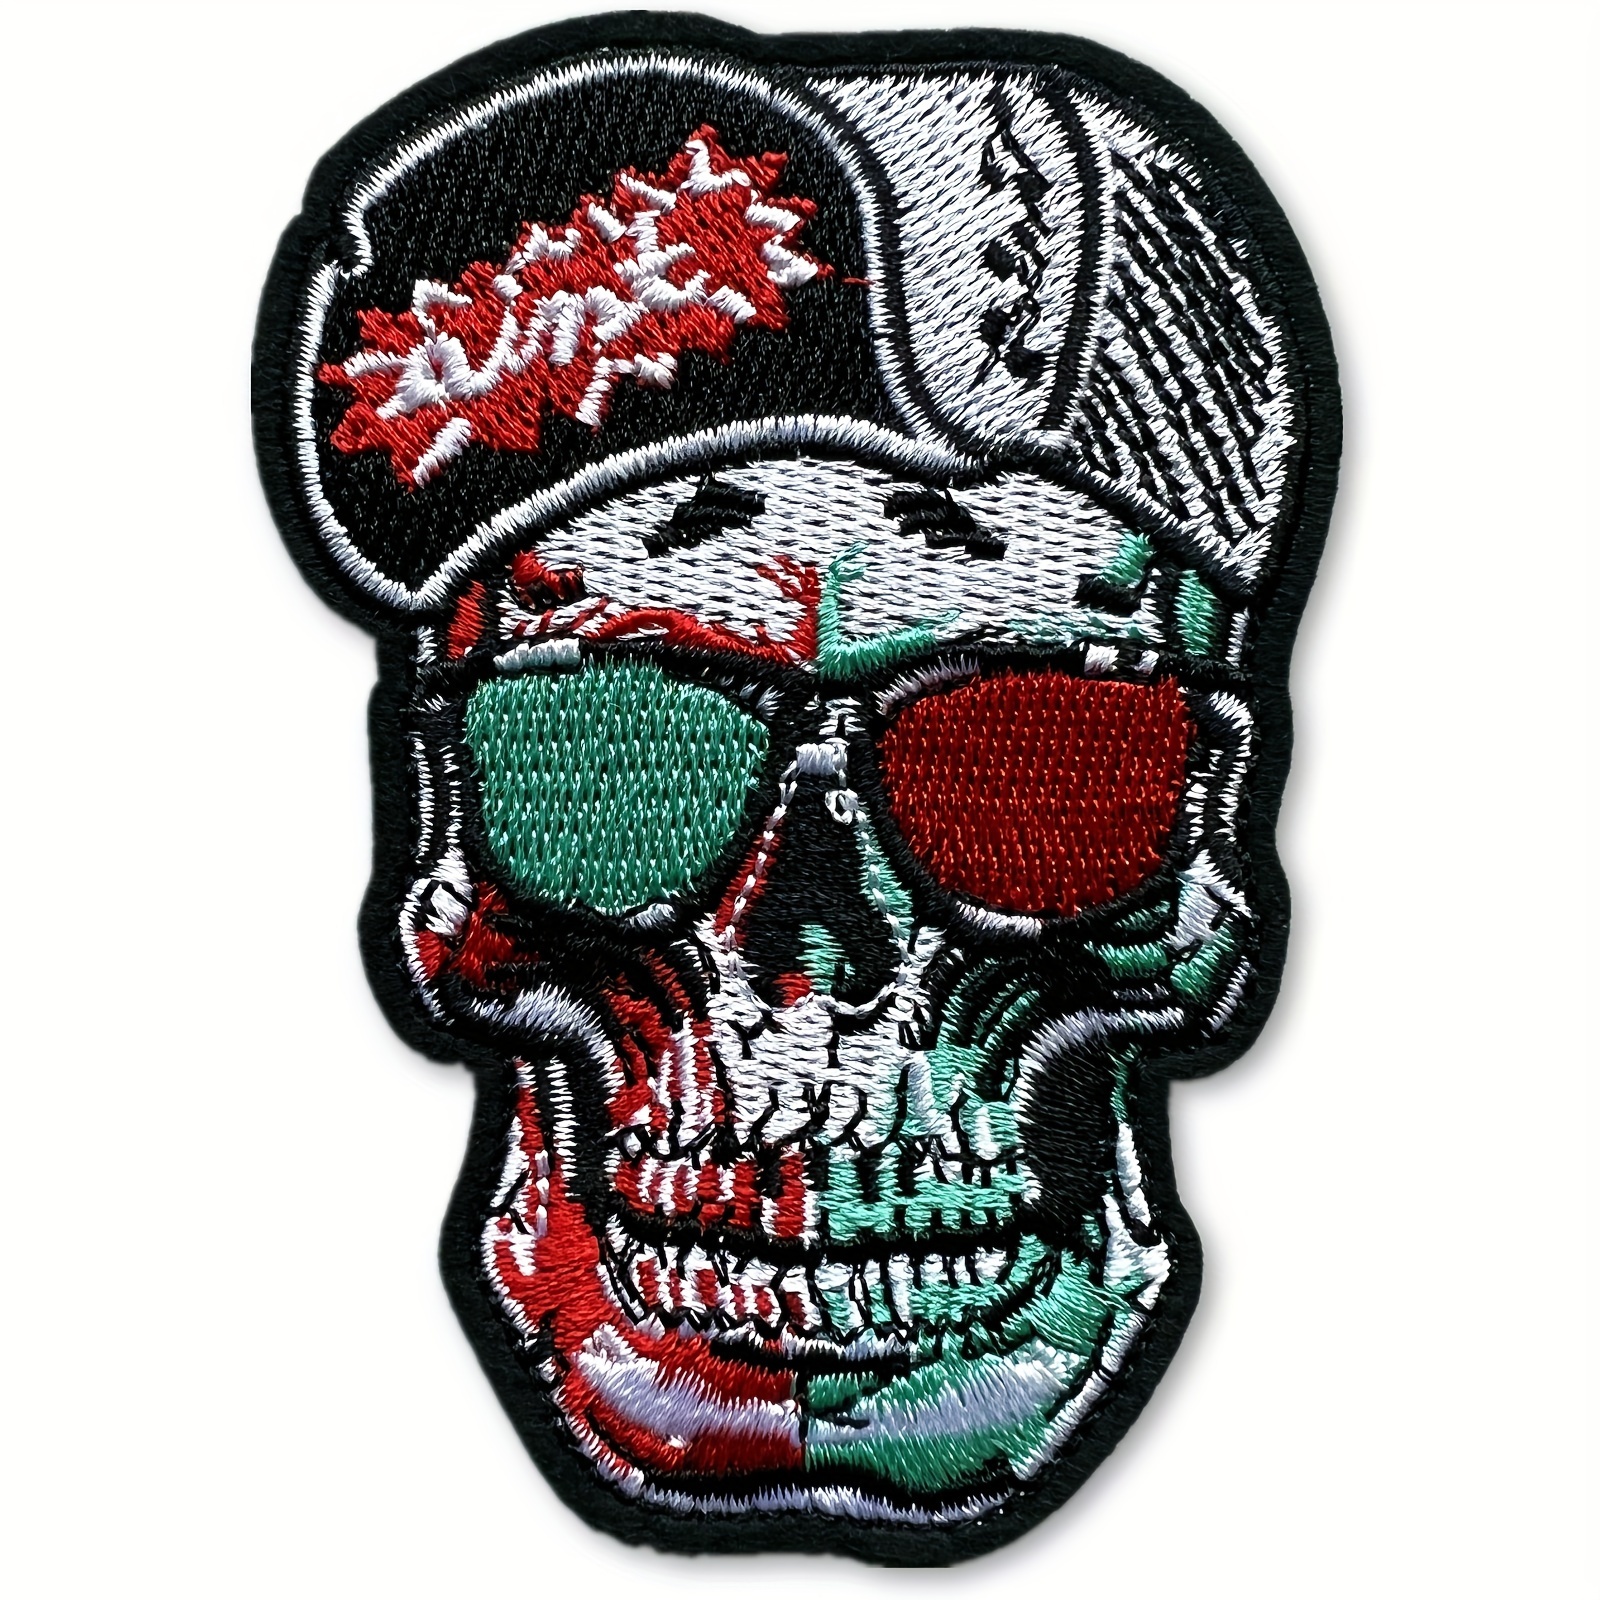 20pcs Clothes Patches (skull/punk) Sew Patches Iron-on Patches Embroidery Patches  Iron Appliques For Clothes, Jeans, Jackets, Backpacks, Hat